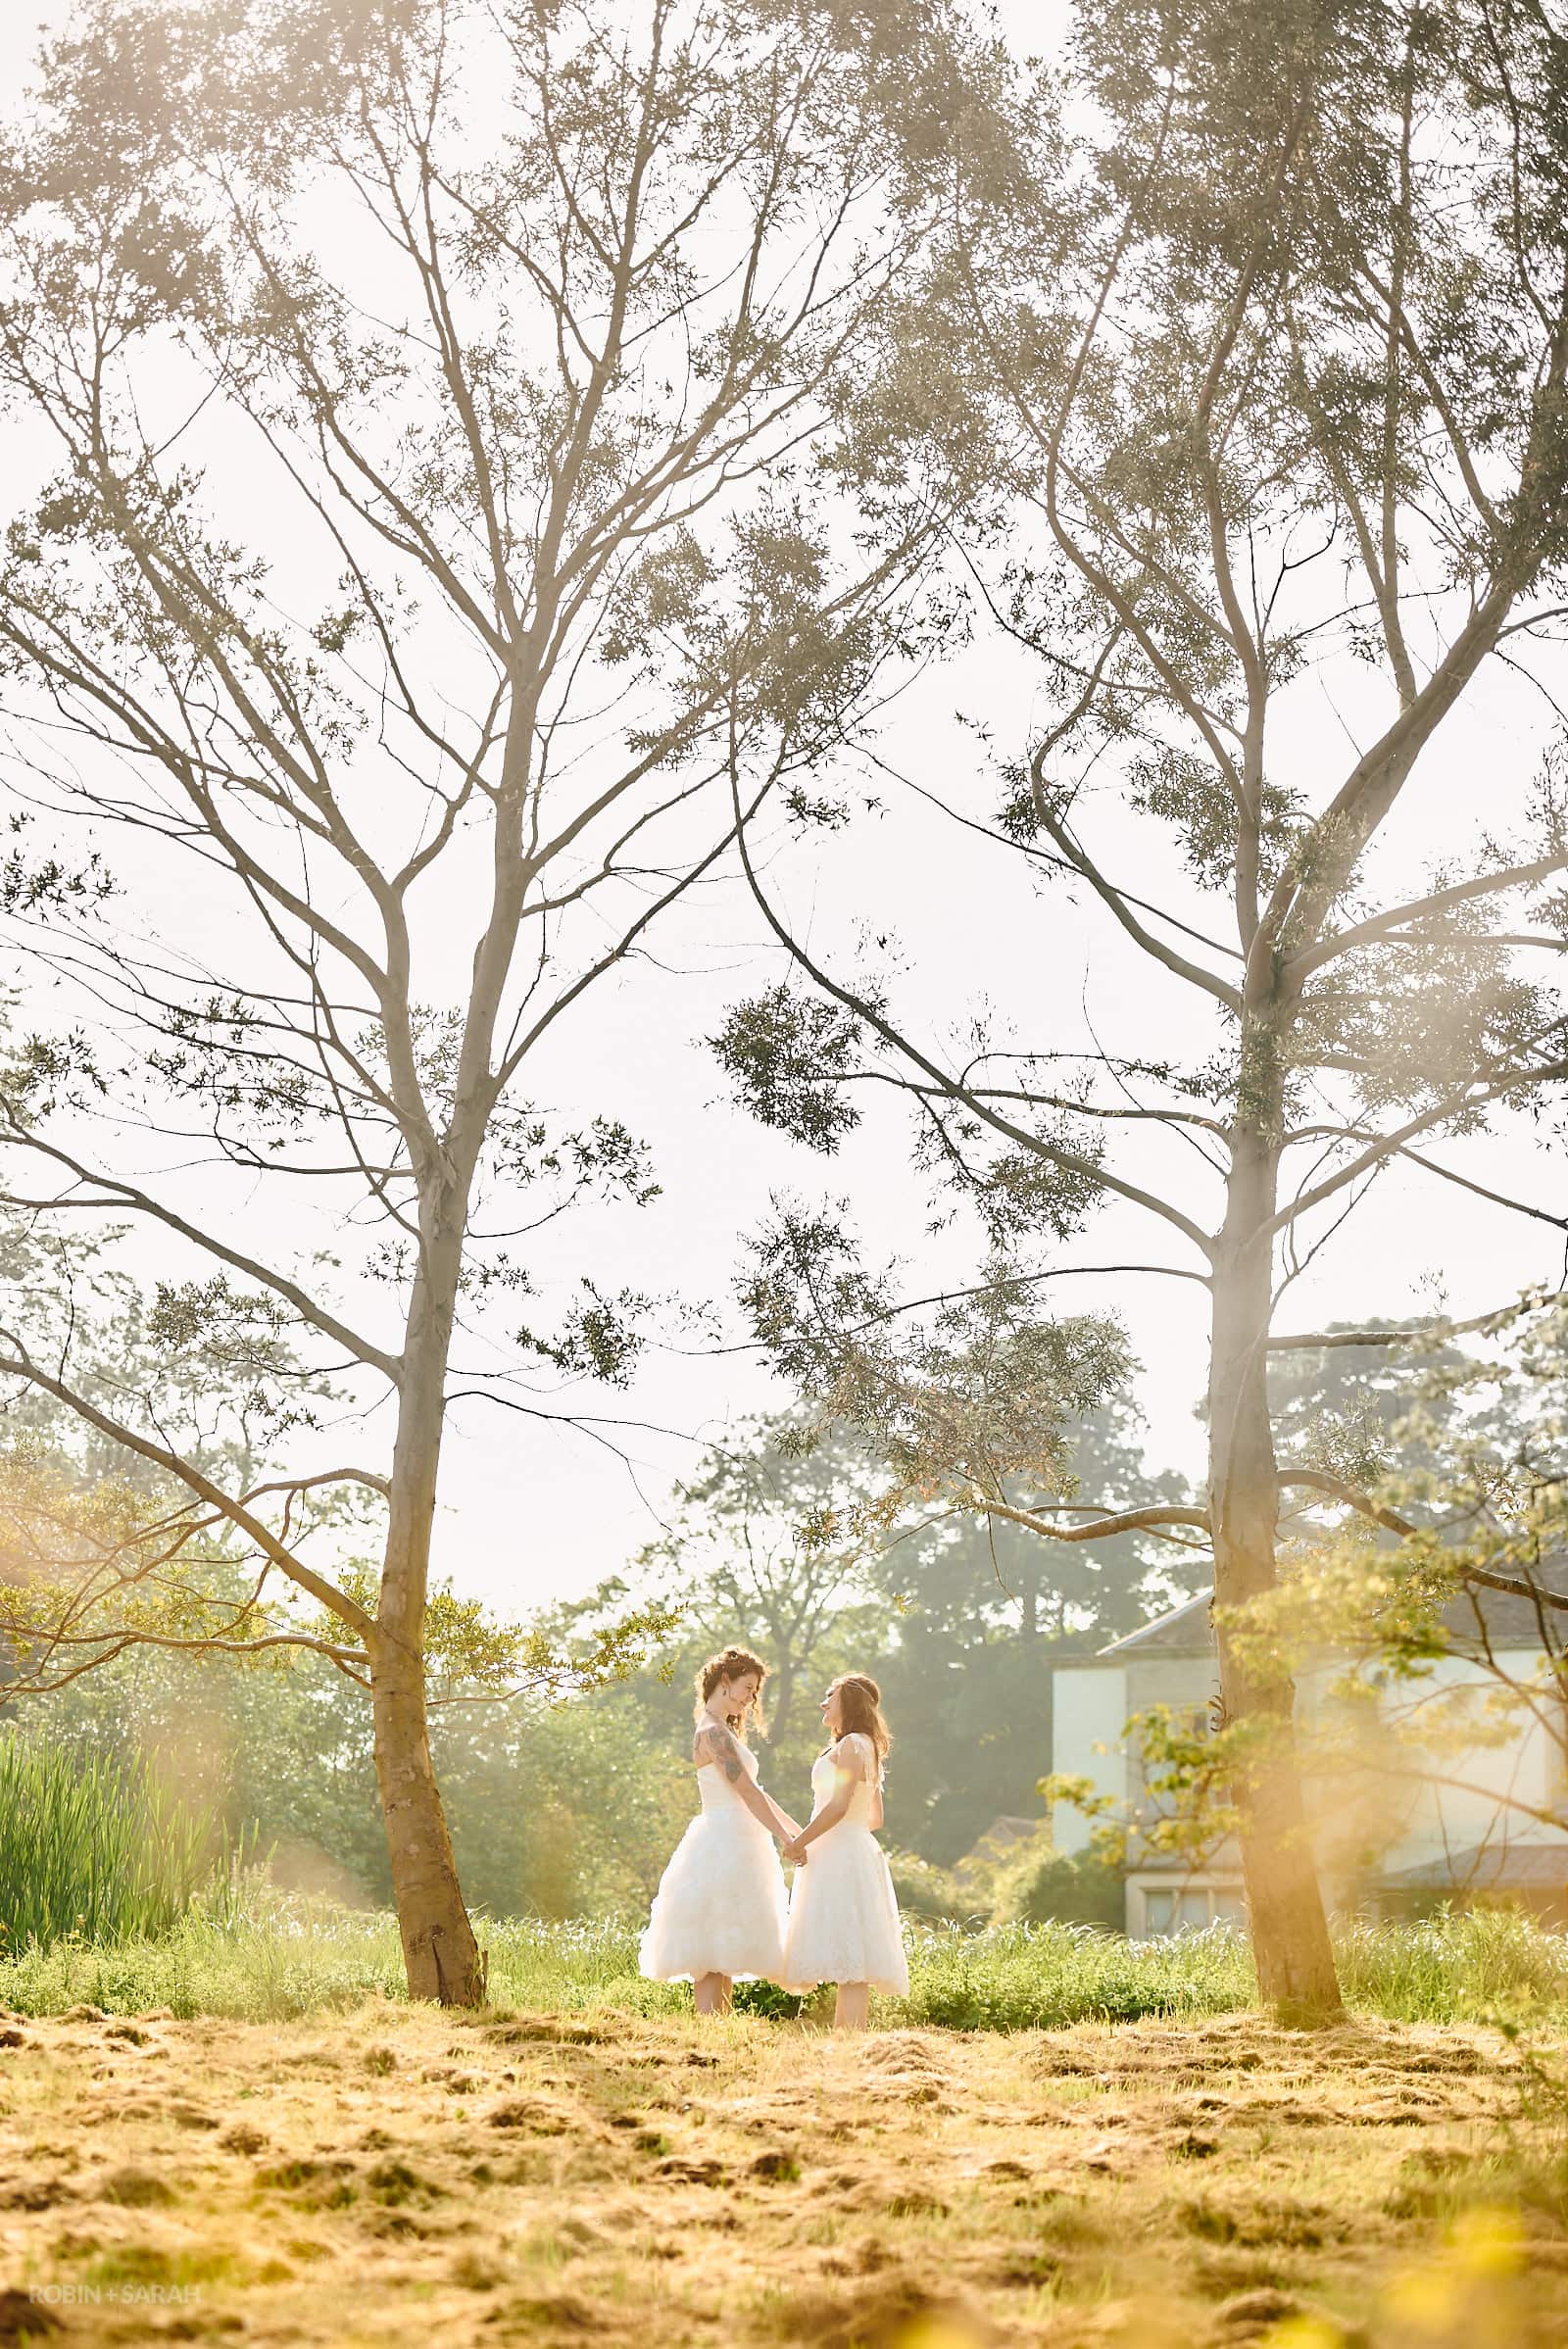 Two brides holding hands beneath two tall trees